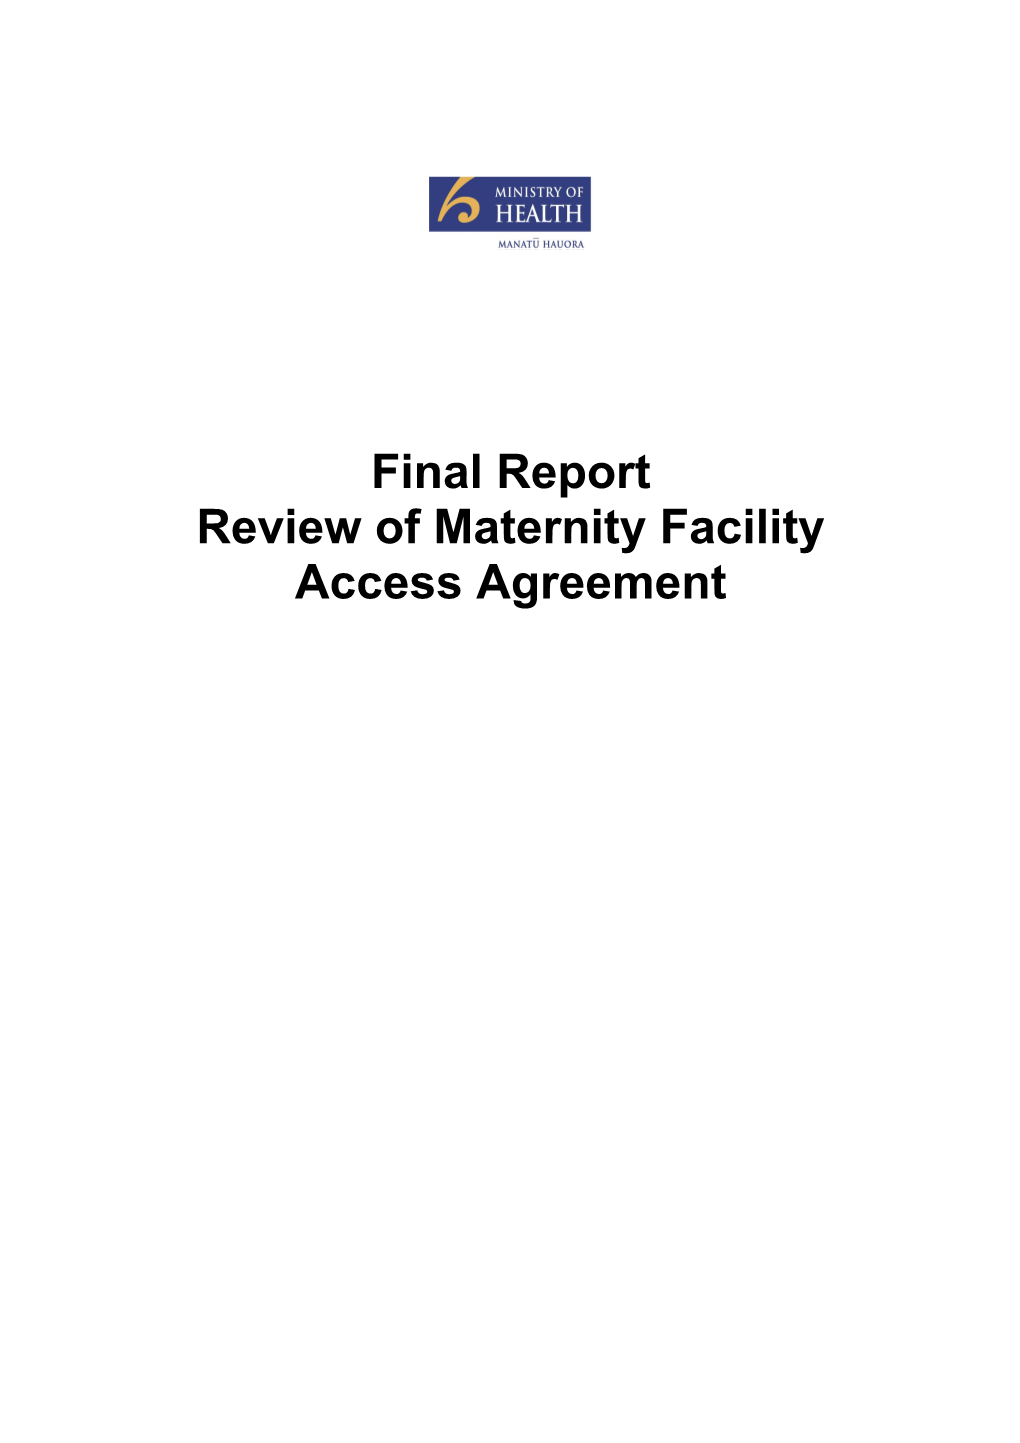 Review of Maternity Facility Access Agreement